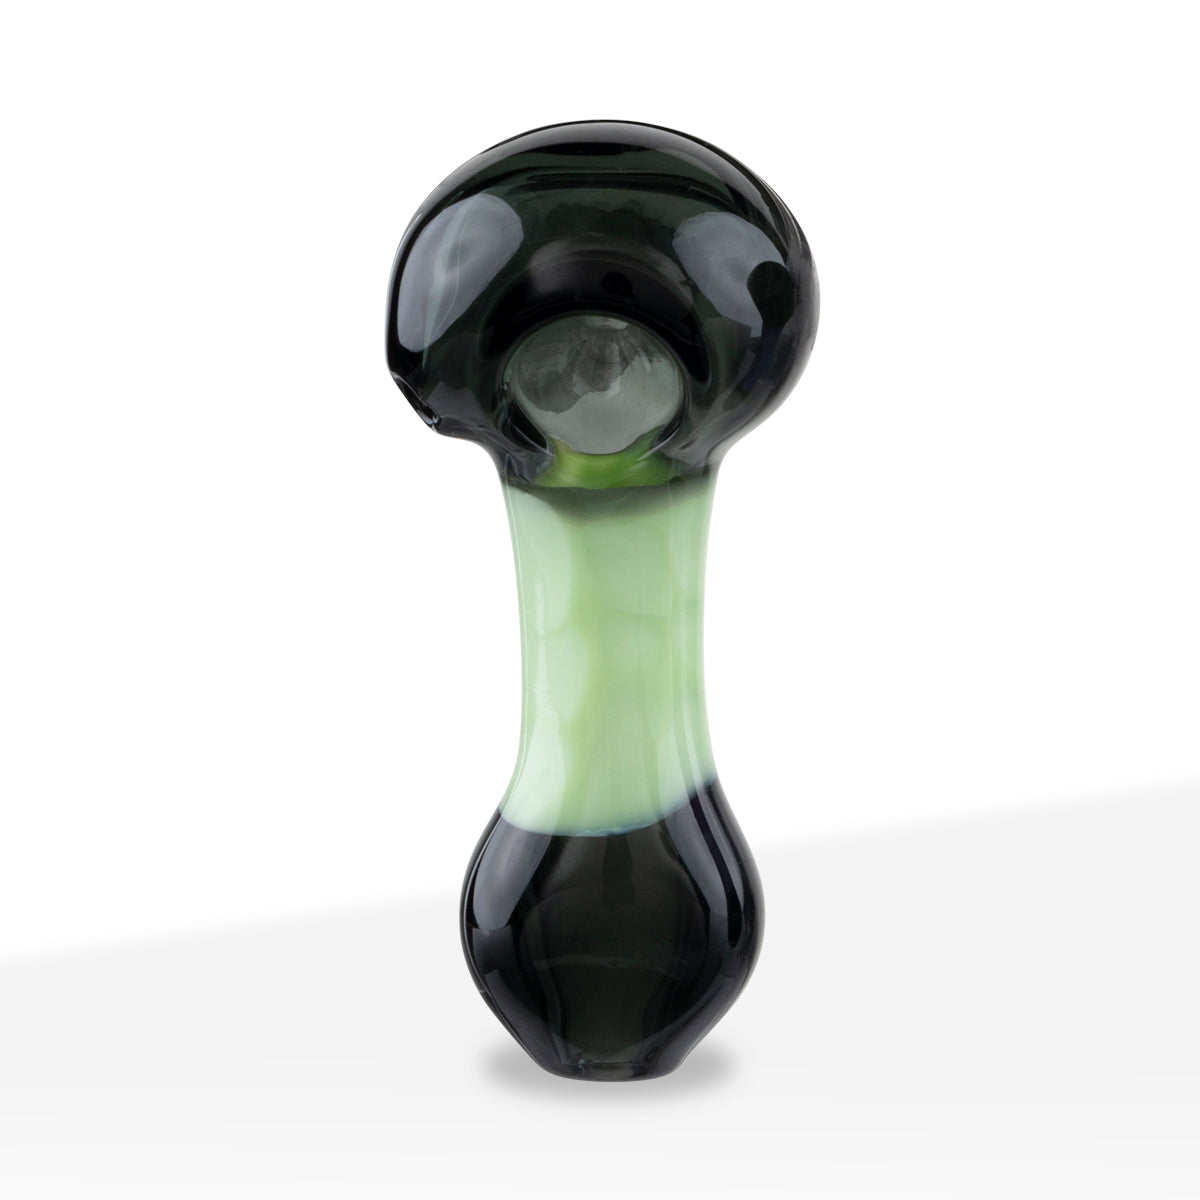 Hand Pipe | Bubble Glass Spoon Hand Pipe Black w/ Slyme | 3.5" - Glass - 3 Count